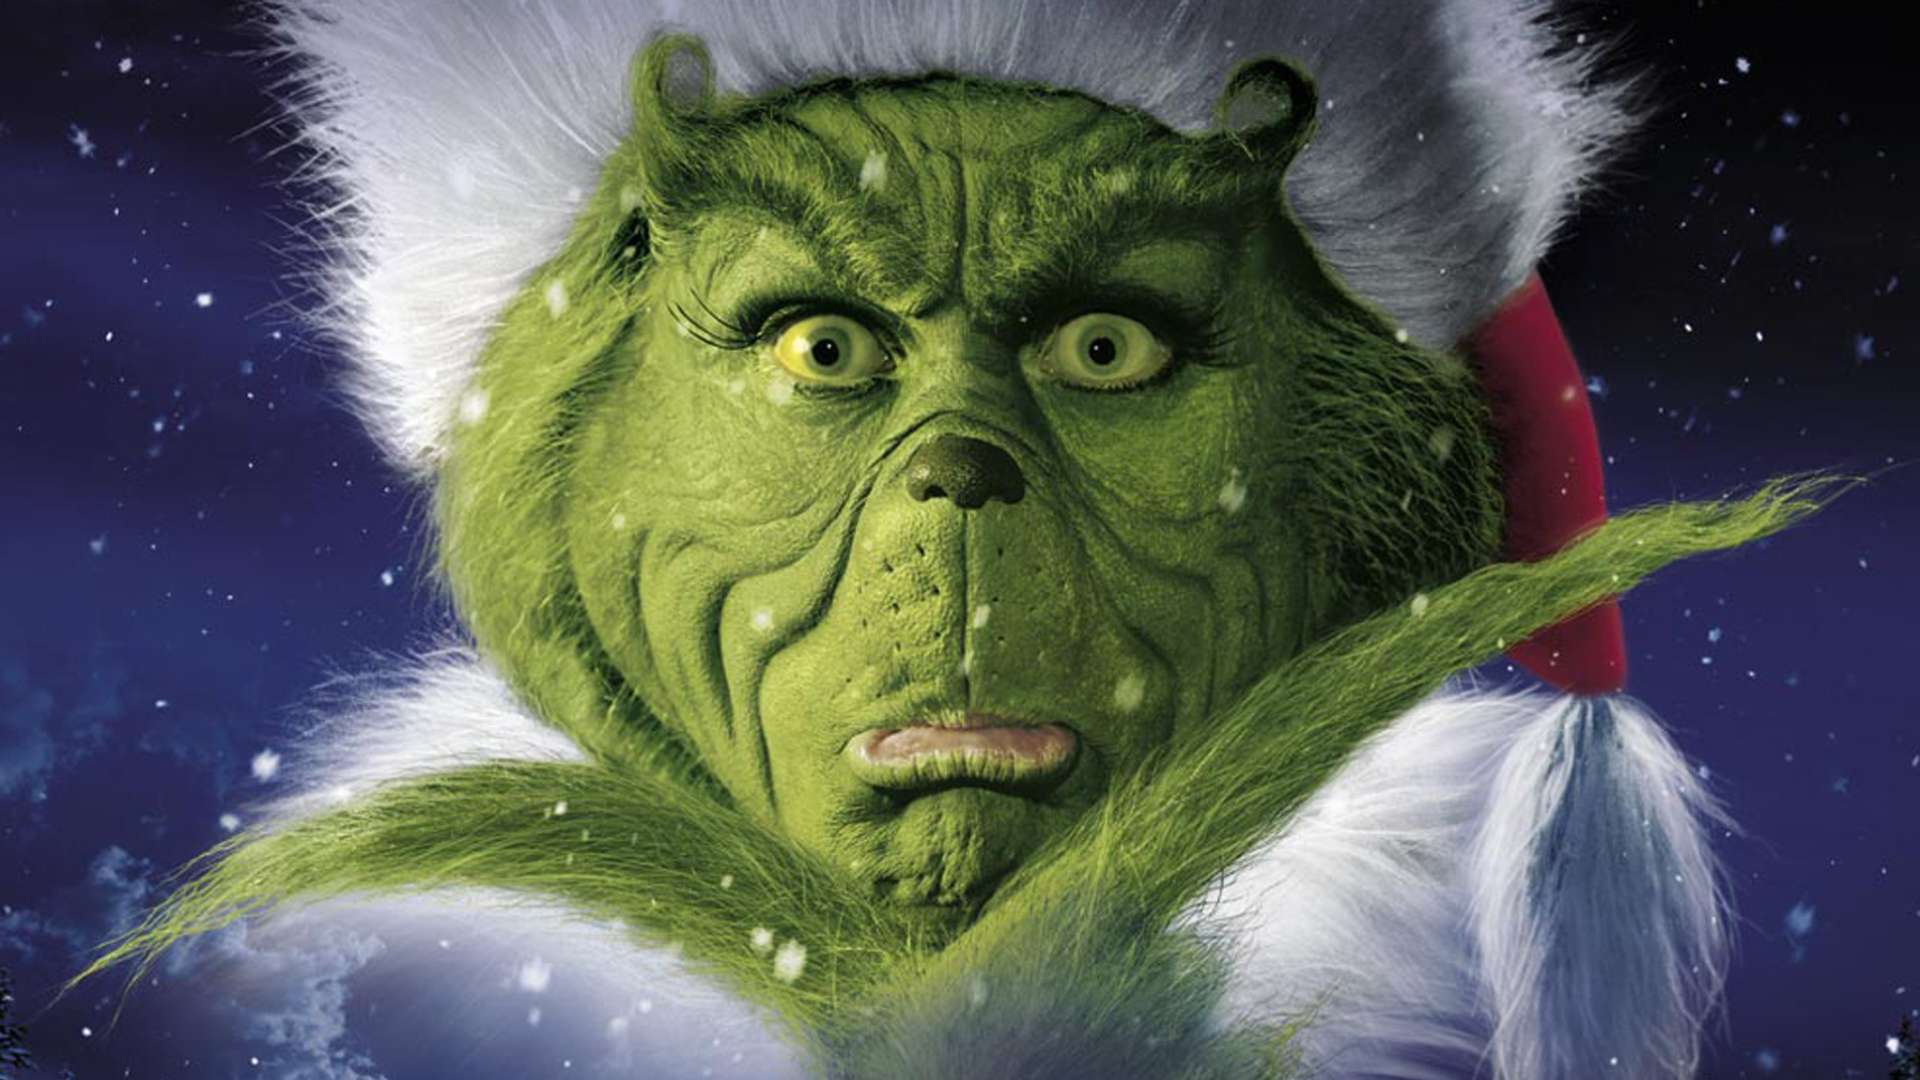 Don’t Let the Grinch Steal Christmas 1